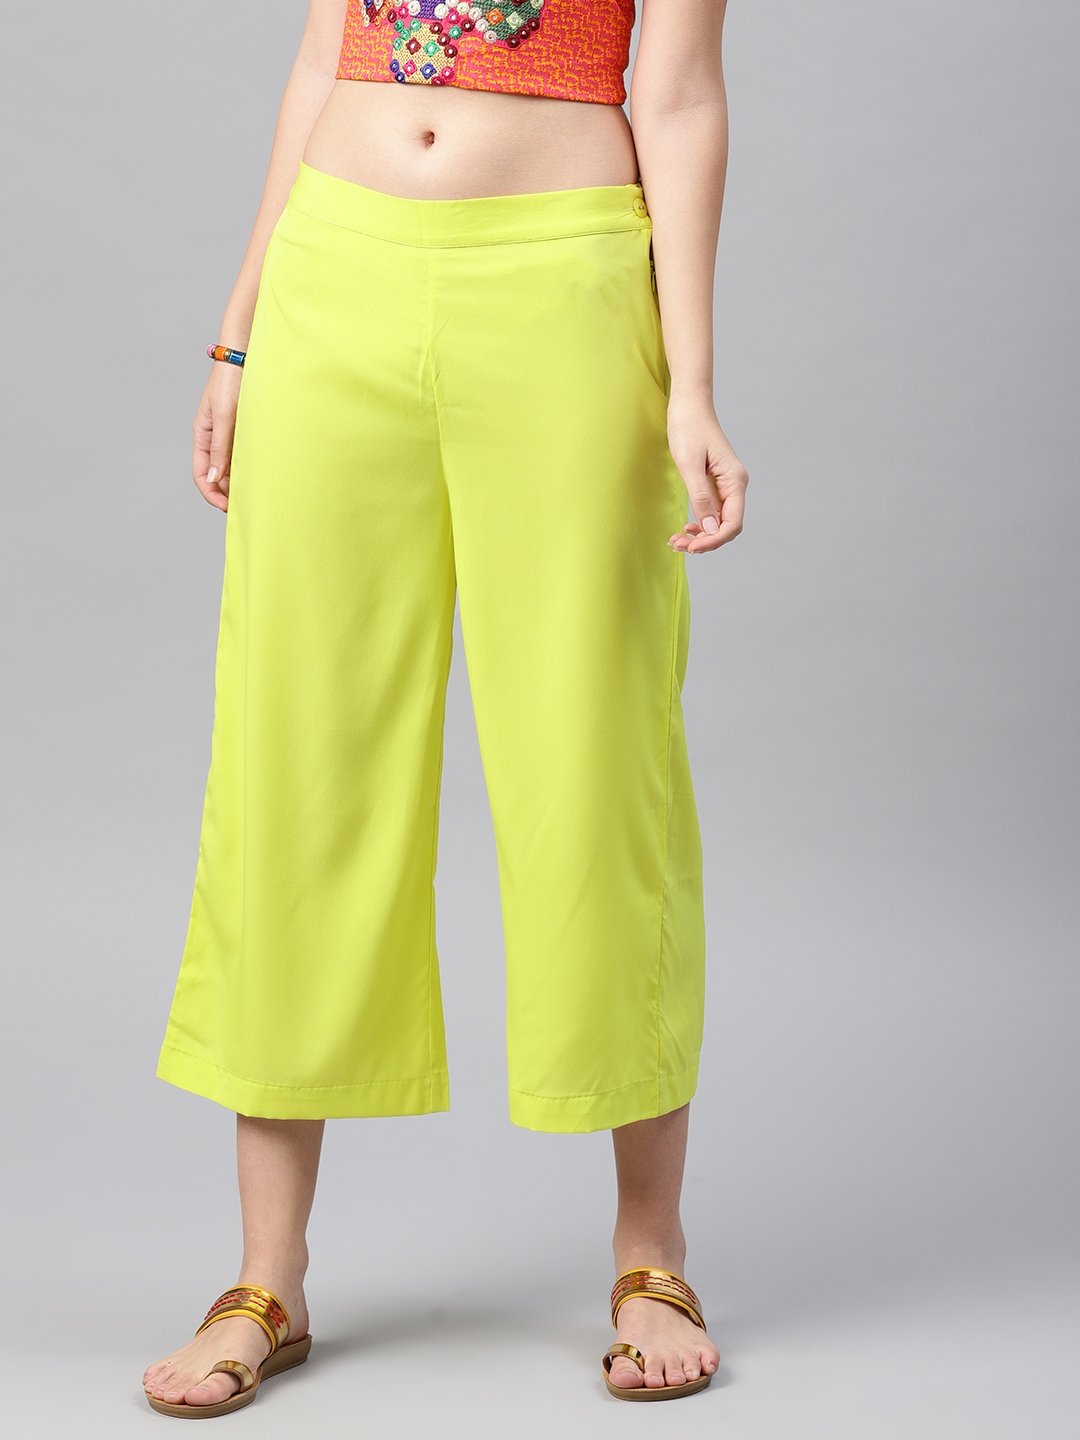 Lime Green Trousers  Buy Lime Green Trousers online in India